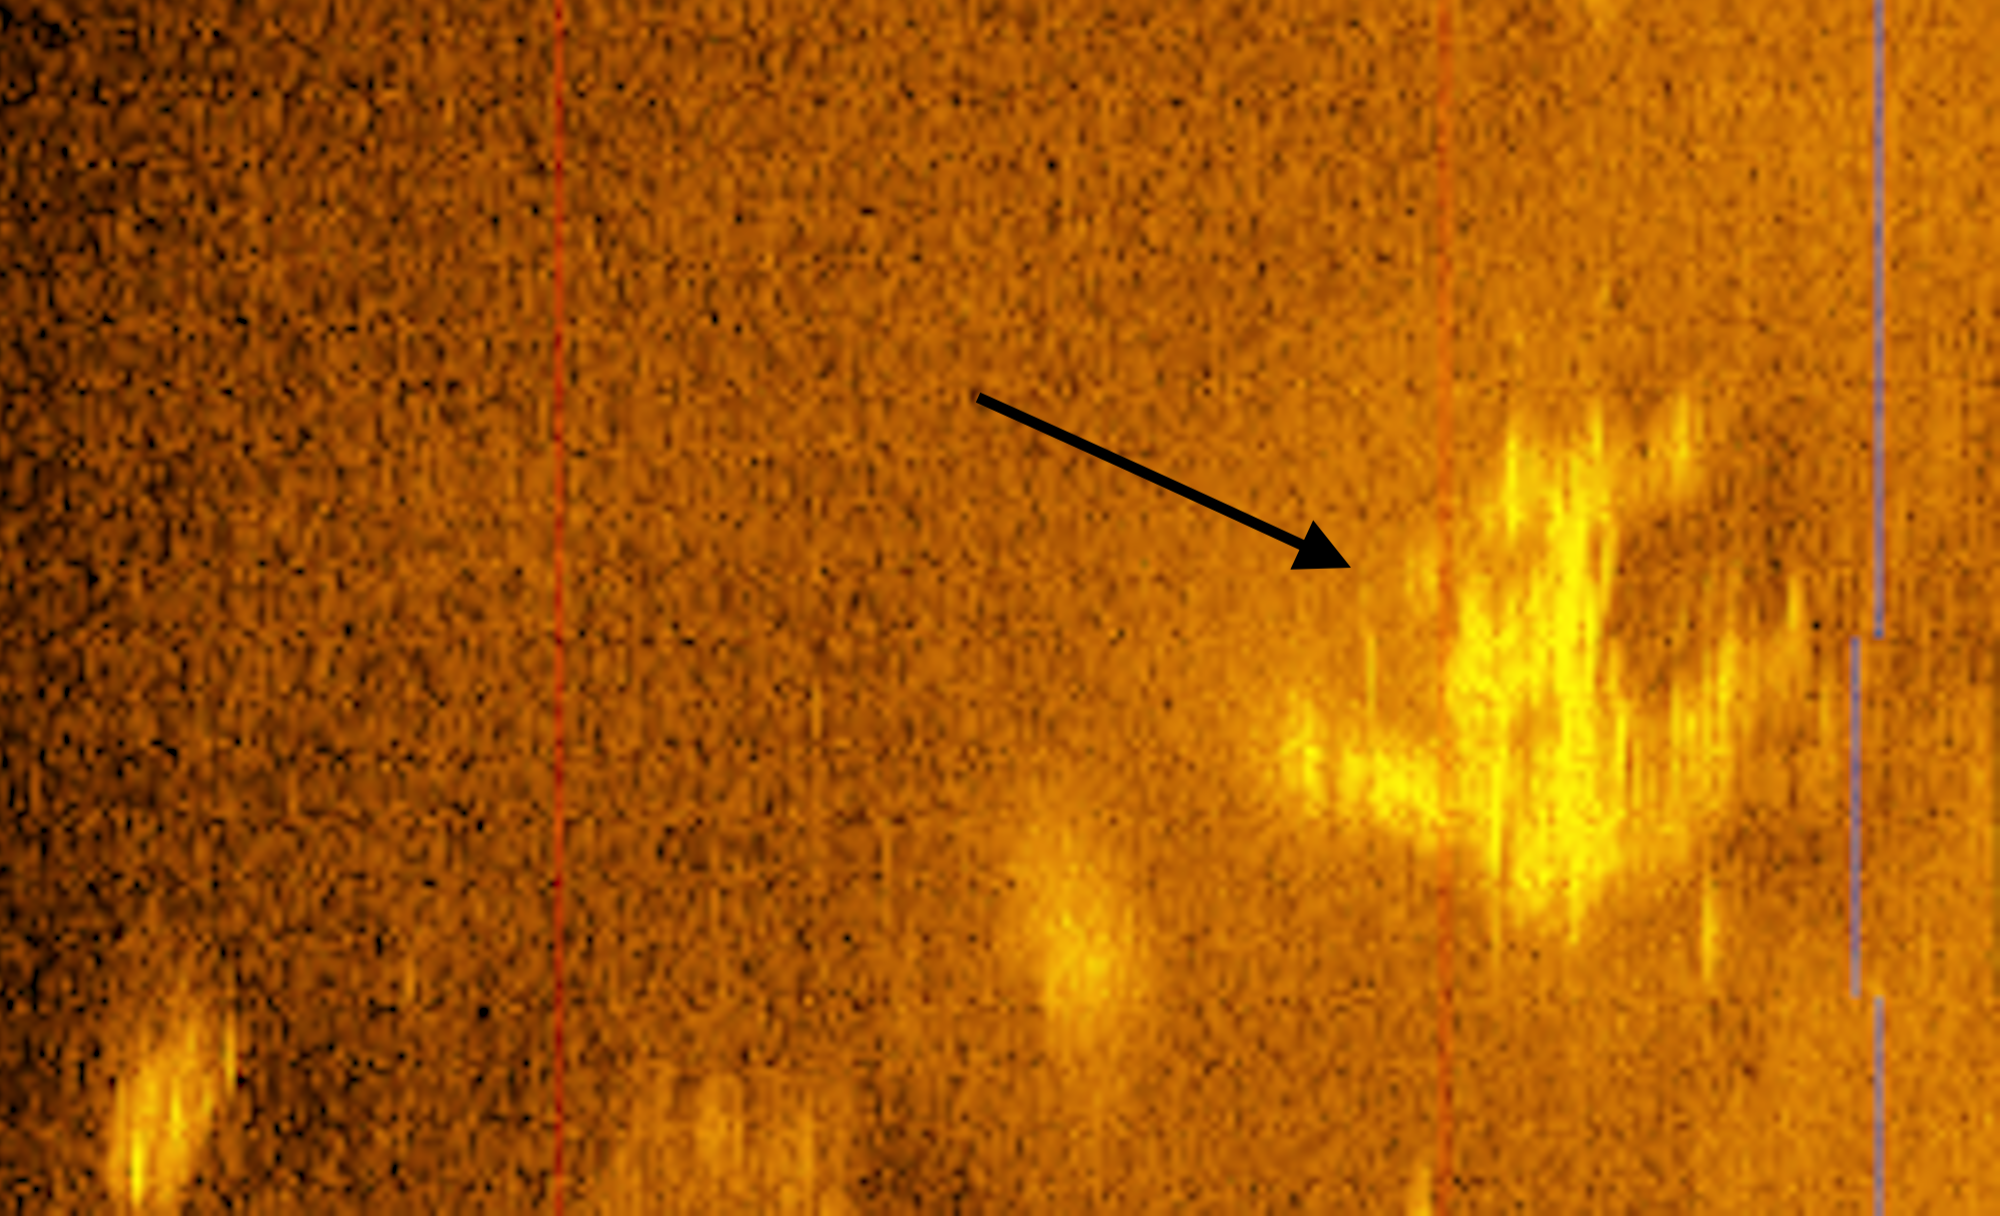 Arrow pointing towards potential sonar scan of Amelia Earhart's airplane